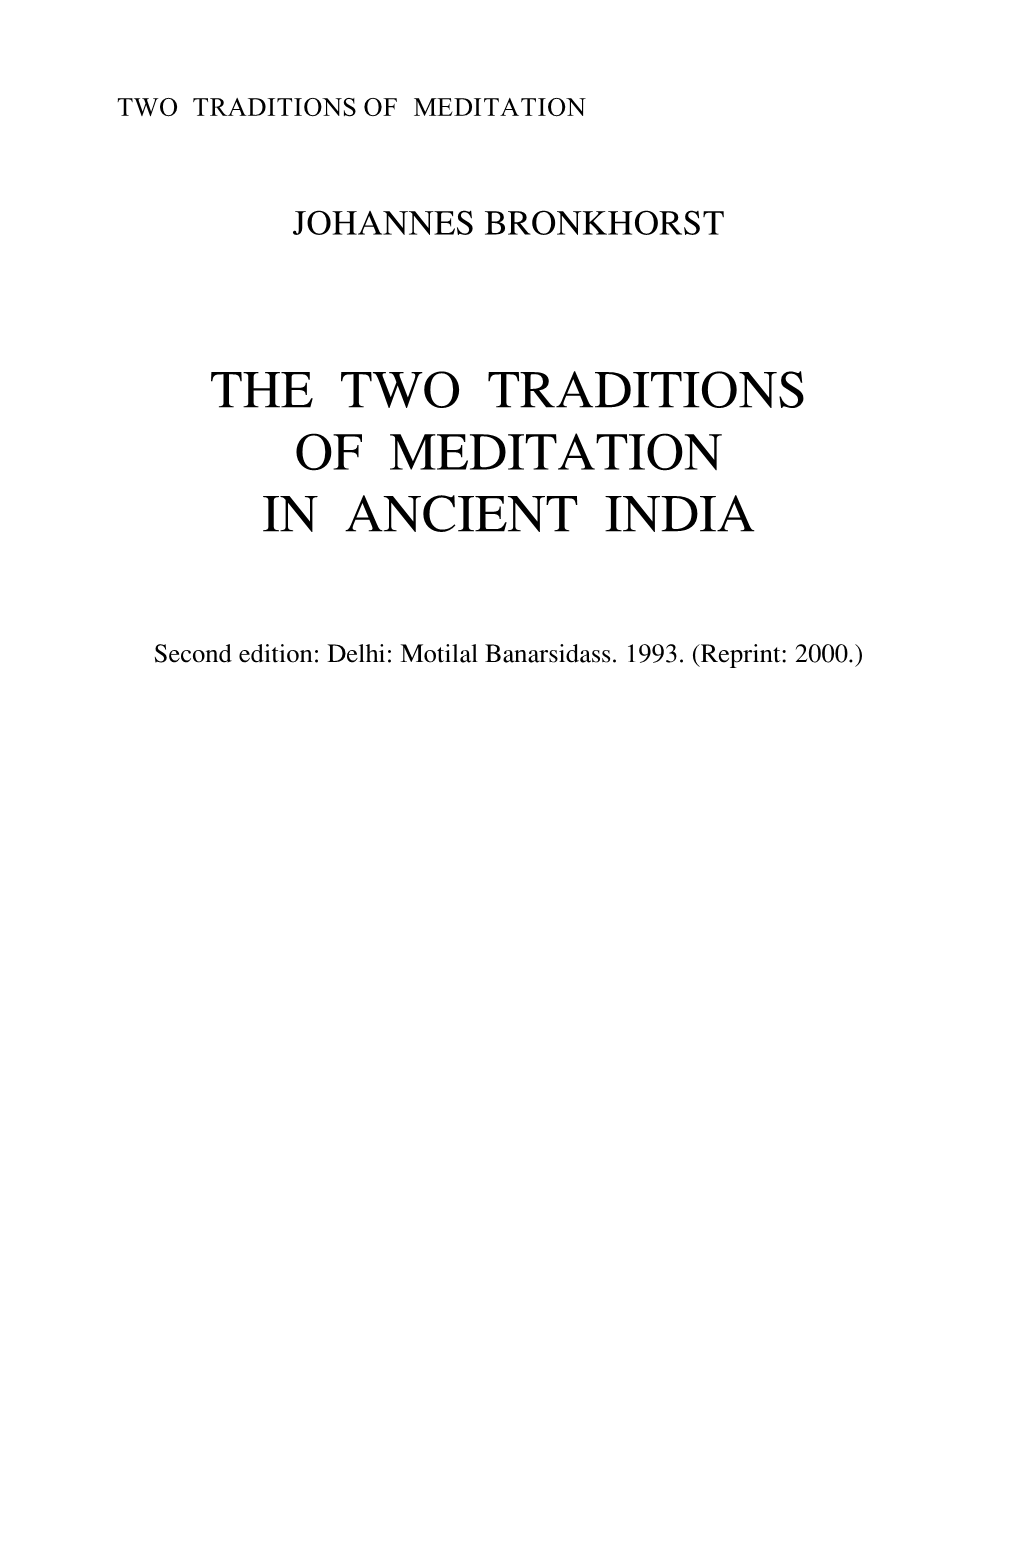 Two Traditions of Meditation in Ancient India, By